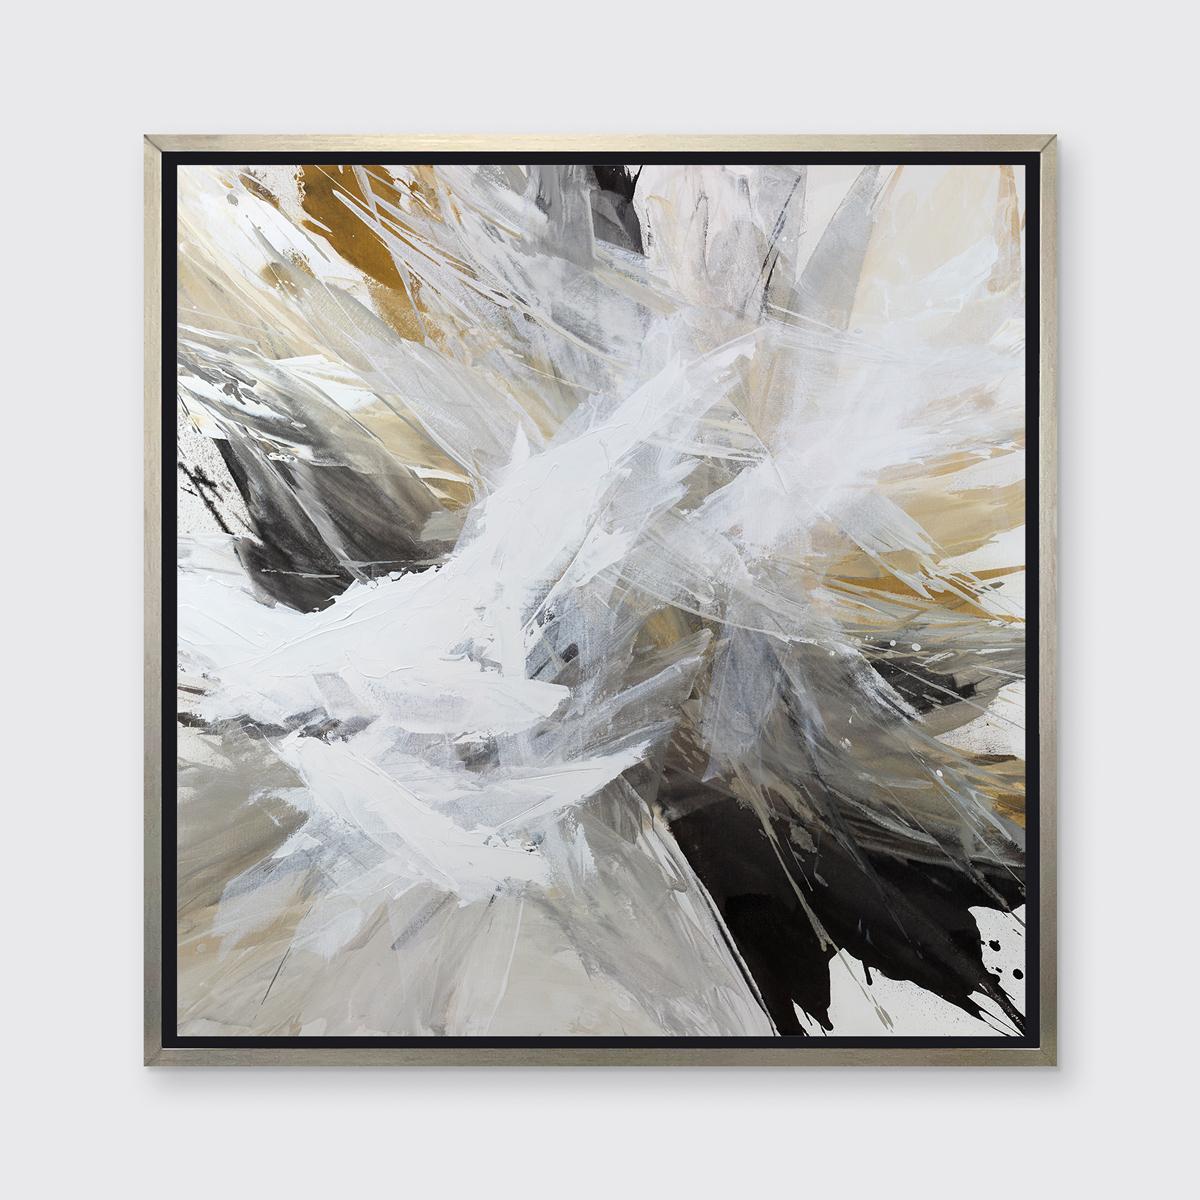 Teodora Guererra Abstract Print - "Today I Choose Palette Knives, " Framed Limited Edition Giclee Print, 53" x 53"